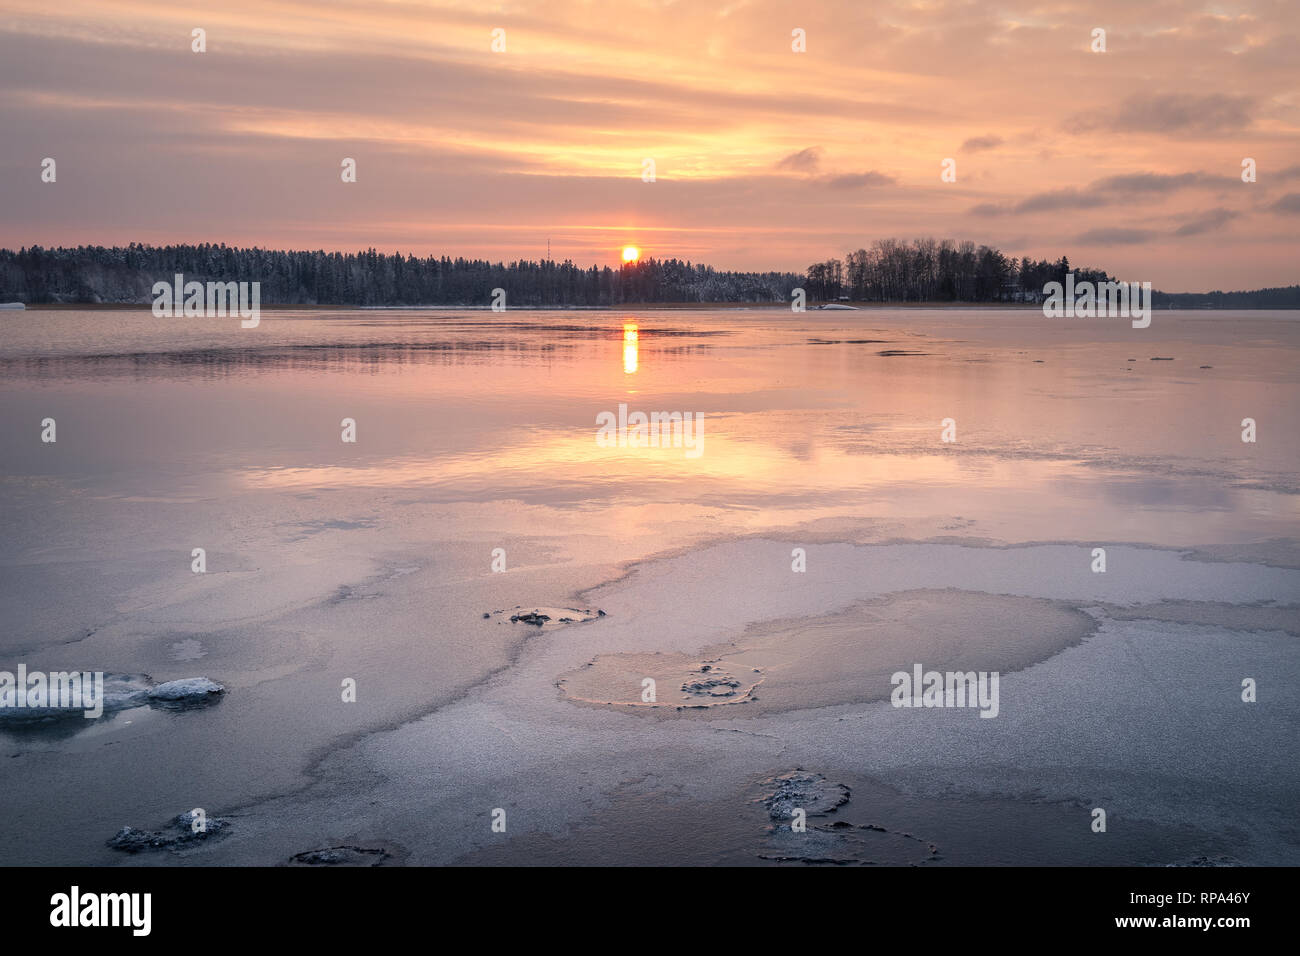 Scenic winter landscape with sunset and water reflections at evening time in Finland Stock Photo